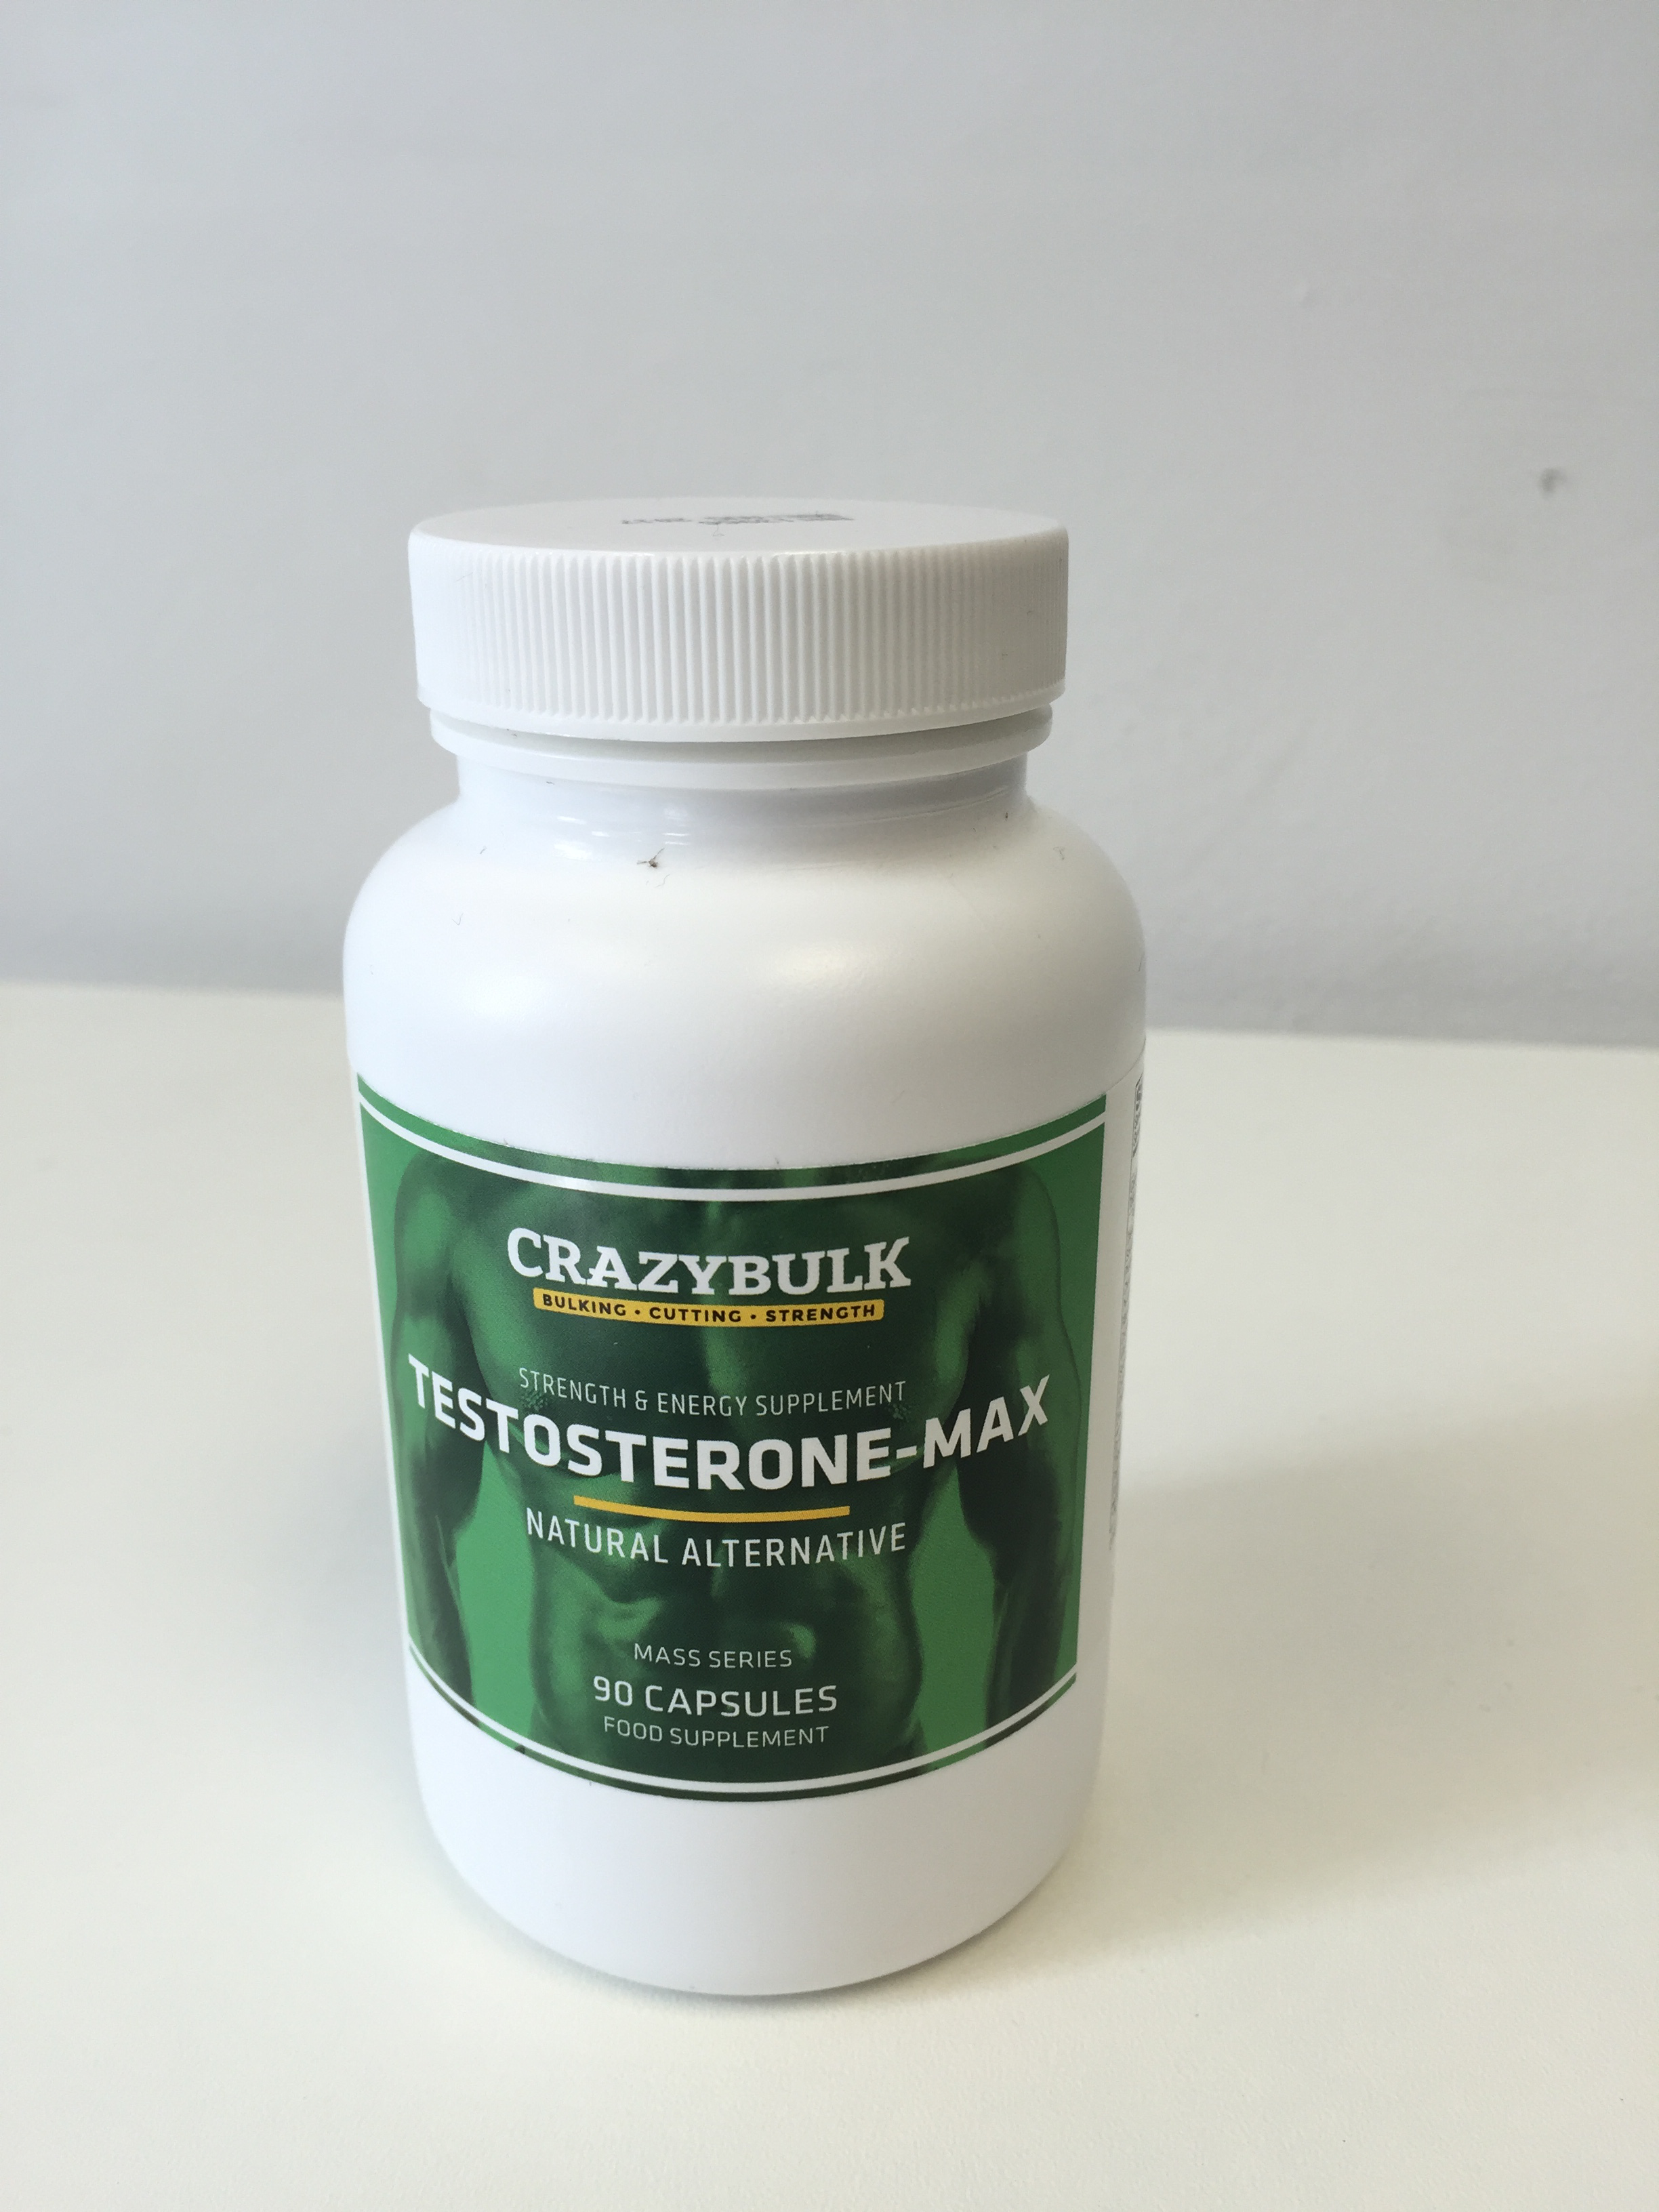 Best creatine supplement for muscle gain